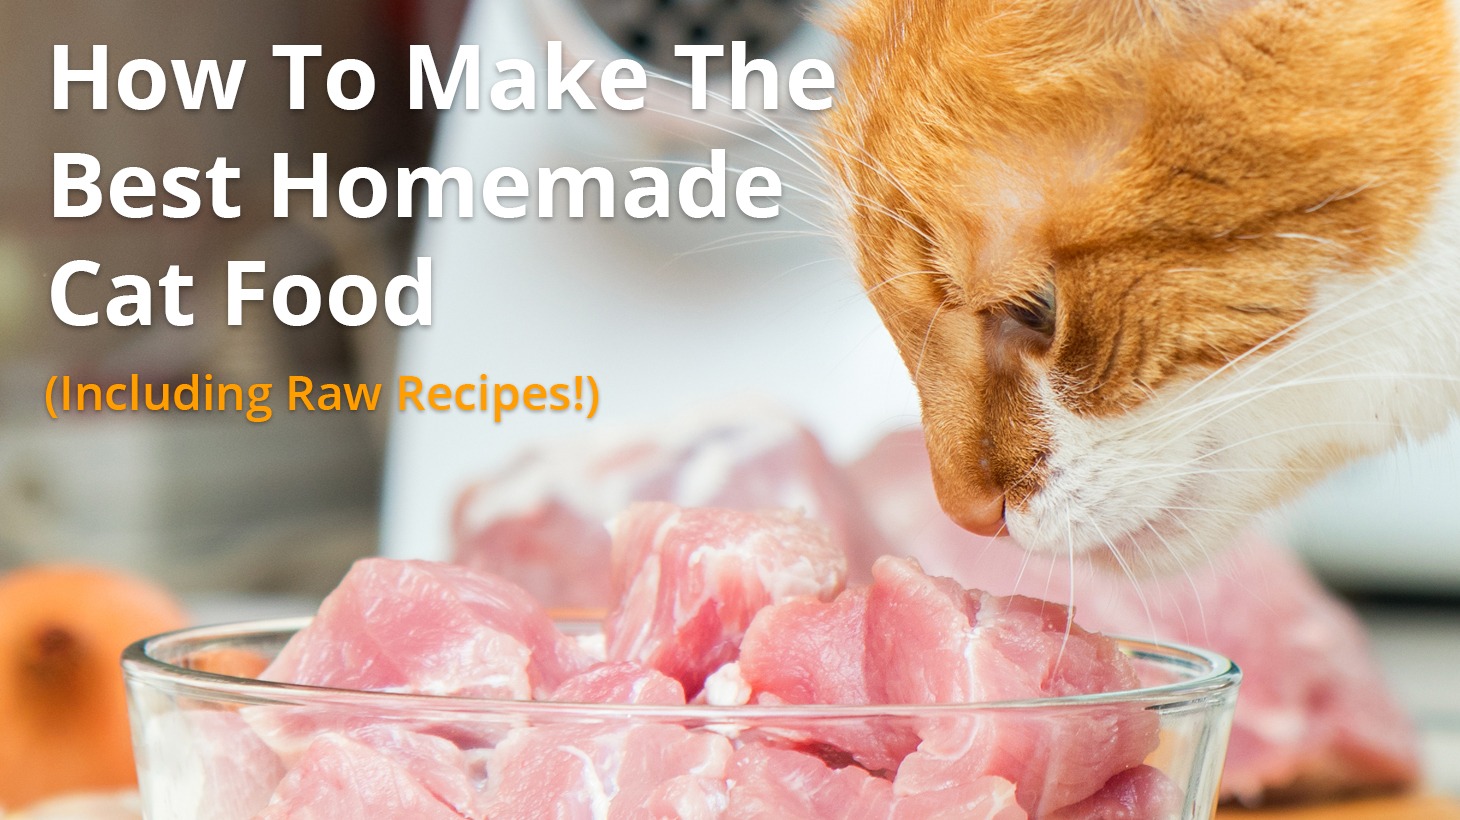 Best Homemade Cat Food Recipes | Raw or 